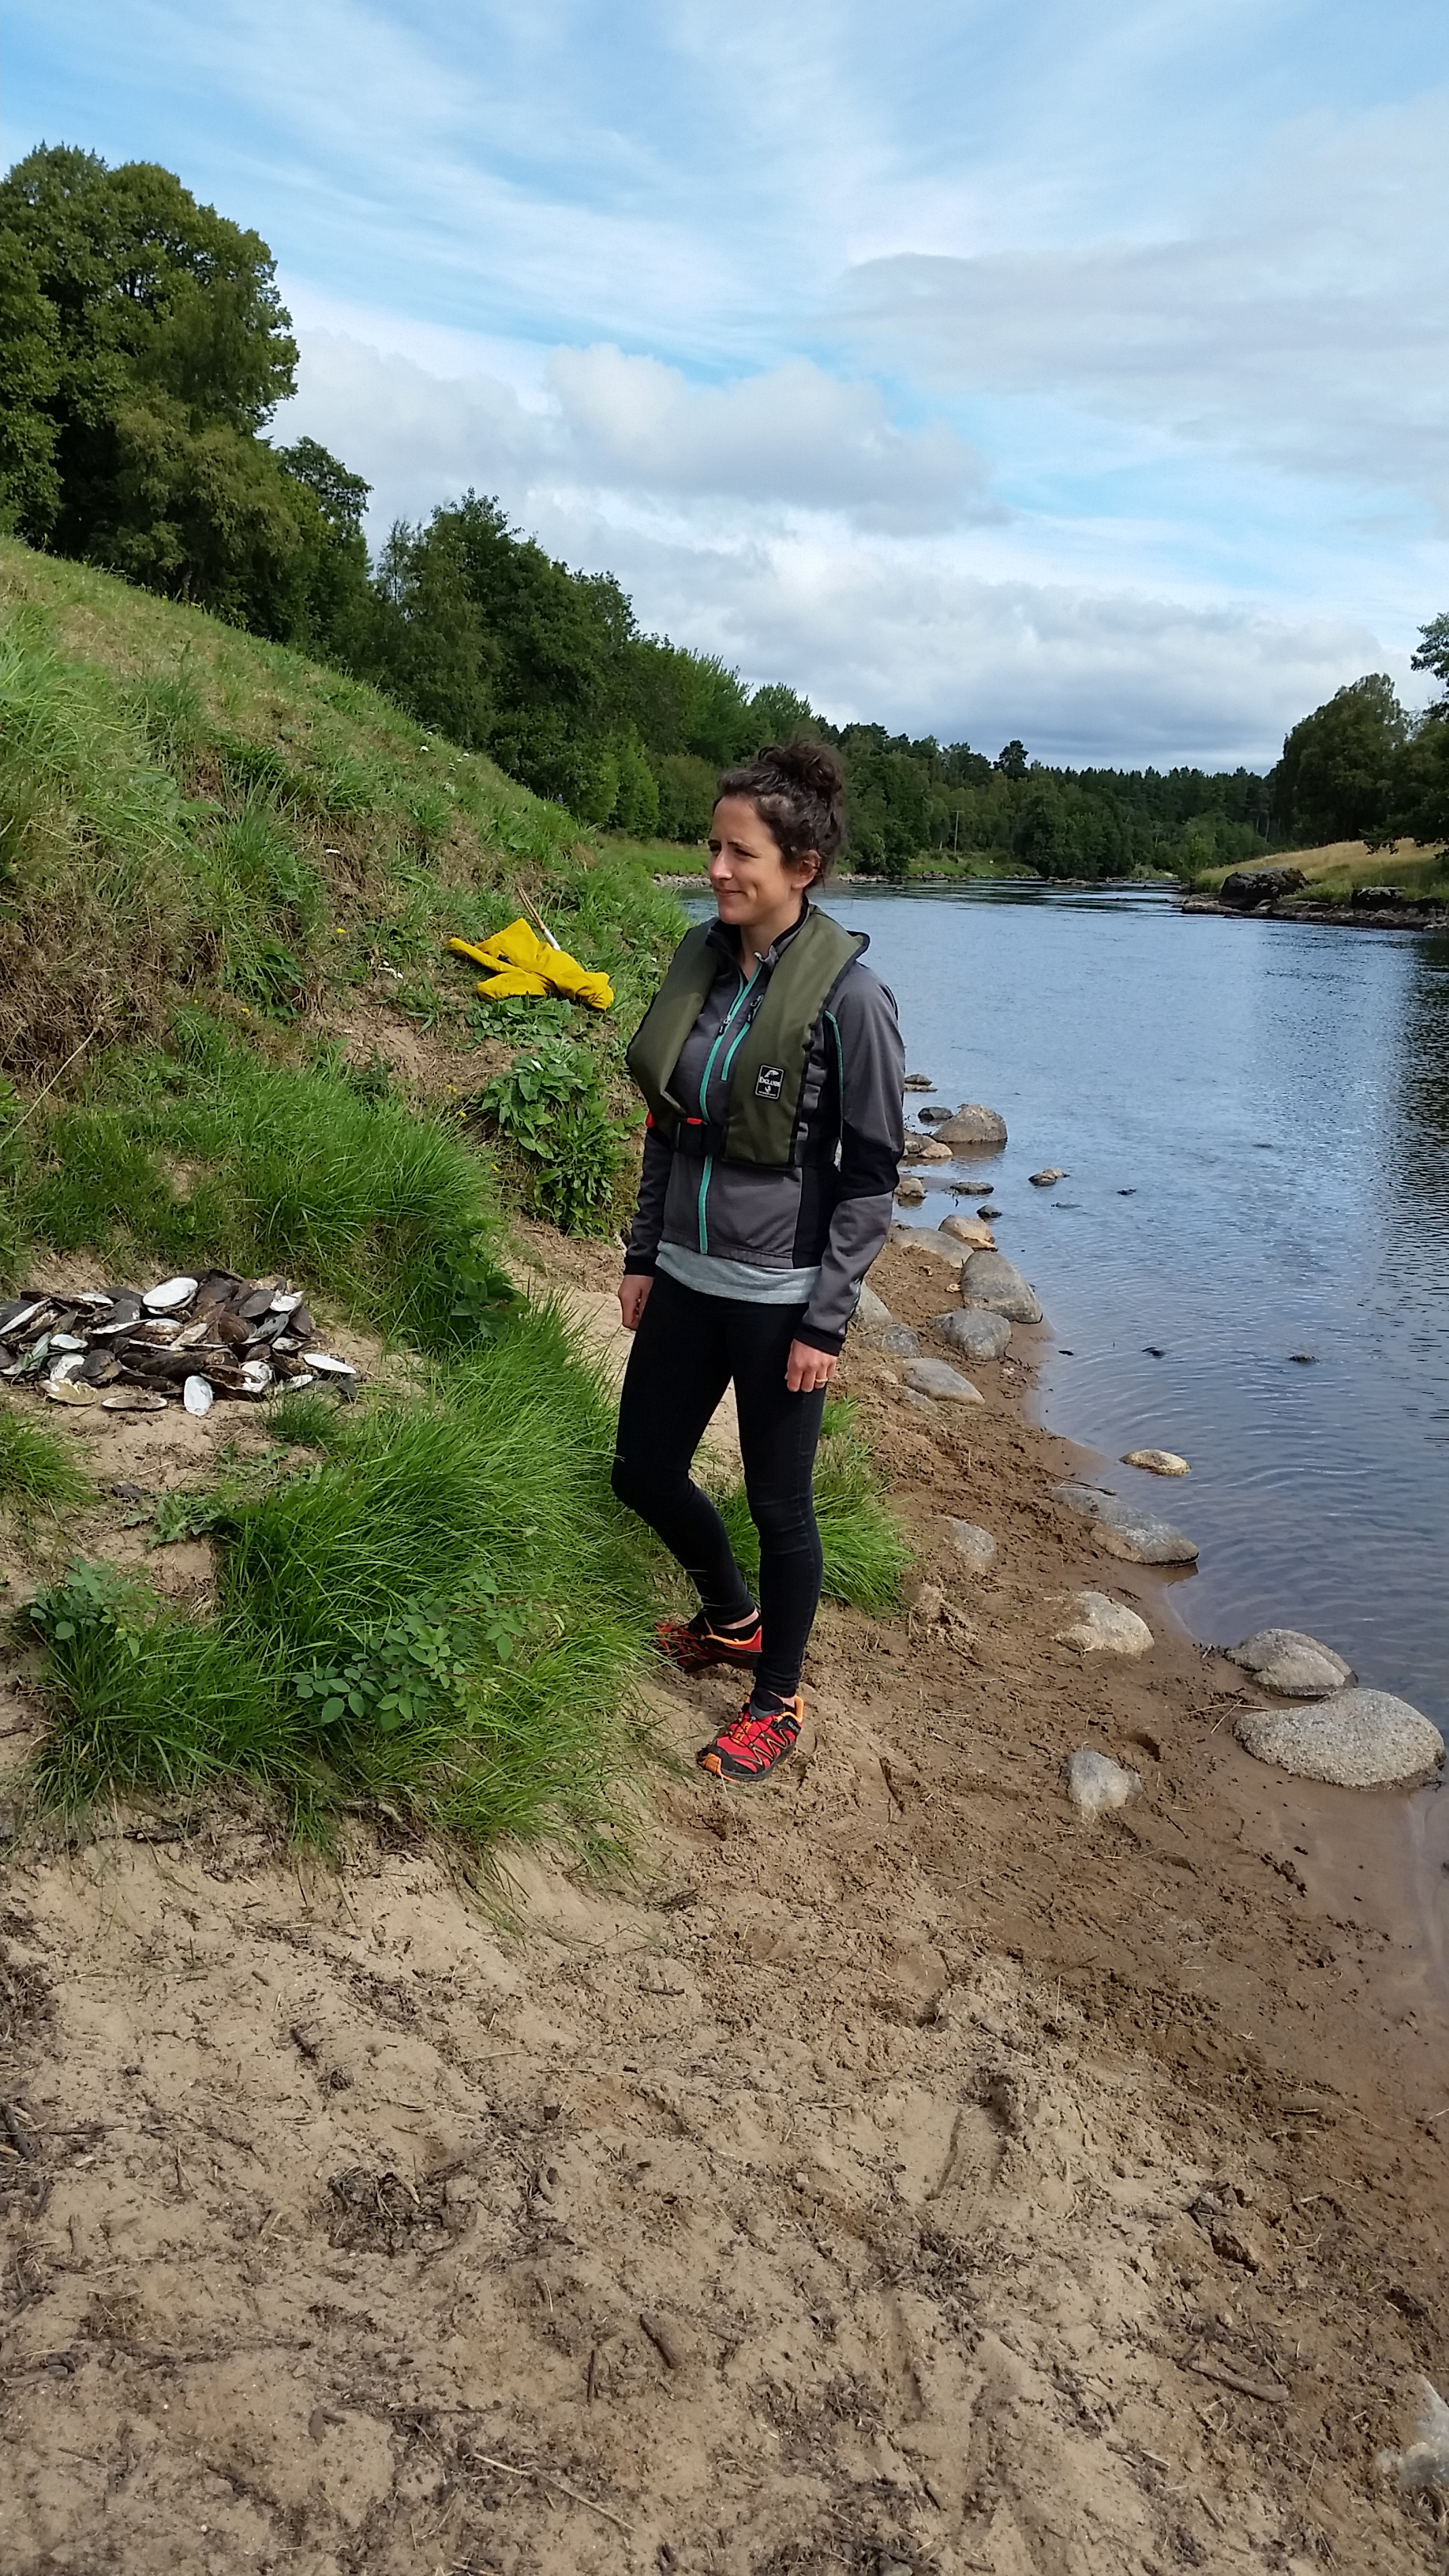 Mairi Gougeon on the river bank